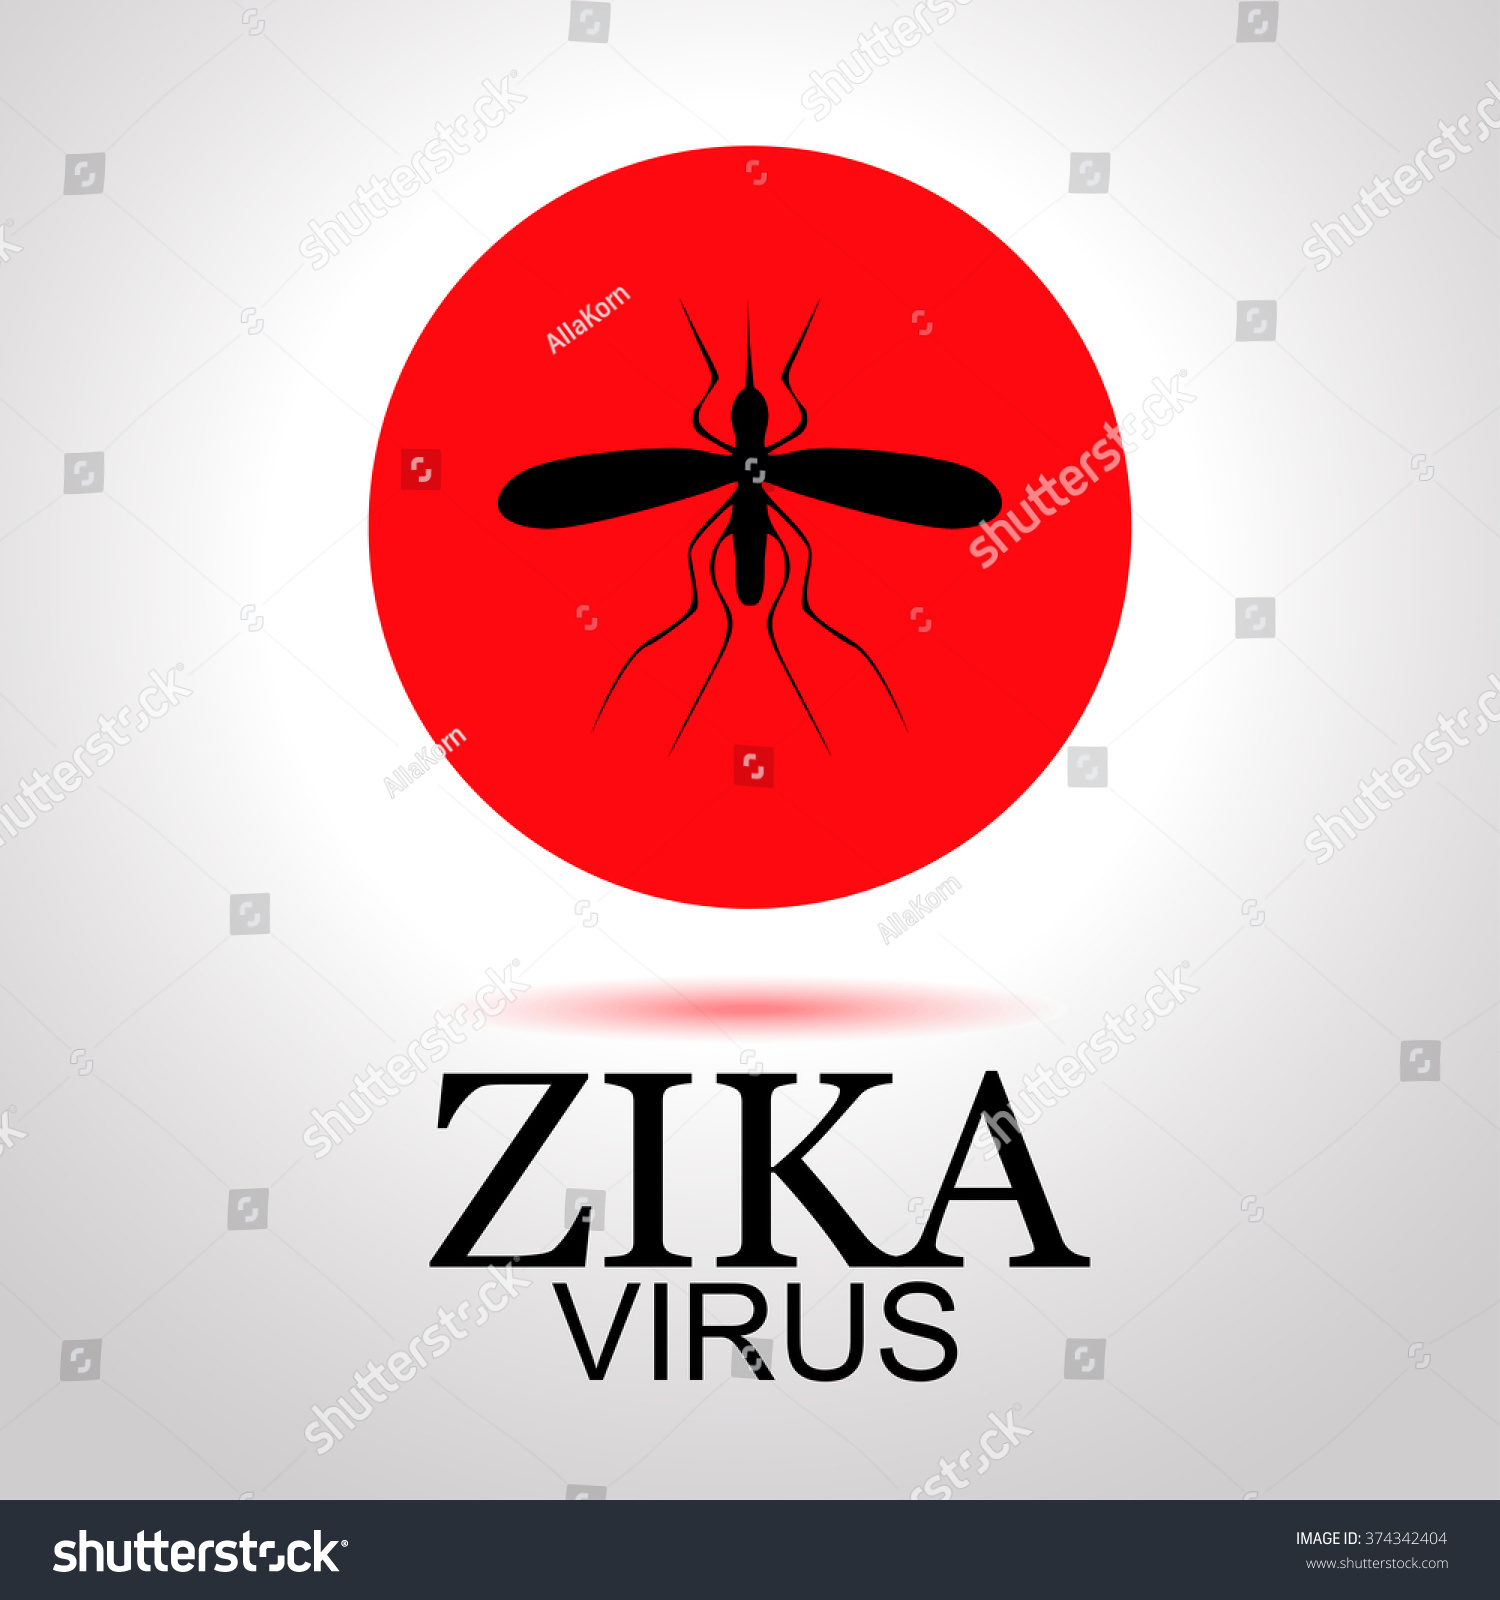 Sets Mosquito Image Icons One Icon Stock Vector (Royalty Free ...